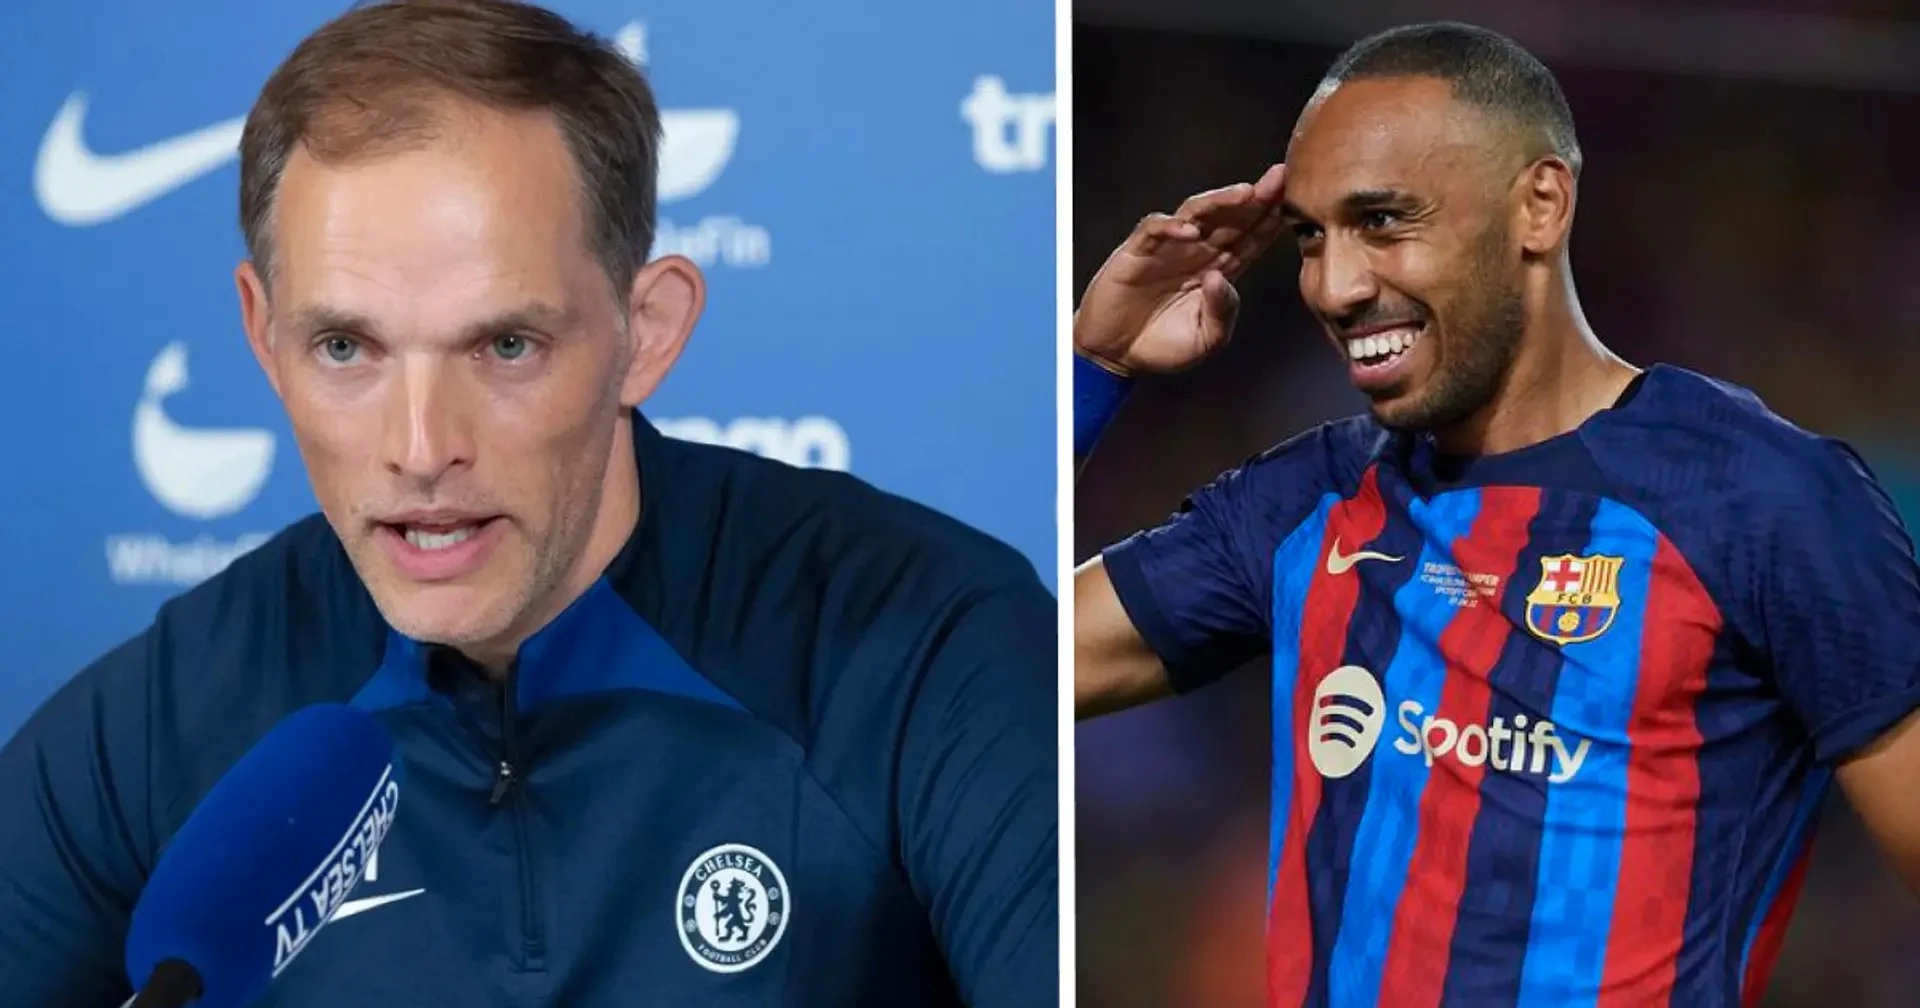 'We still have time': Tuchel names 2 positions Chelsea are trying to strengthen